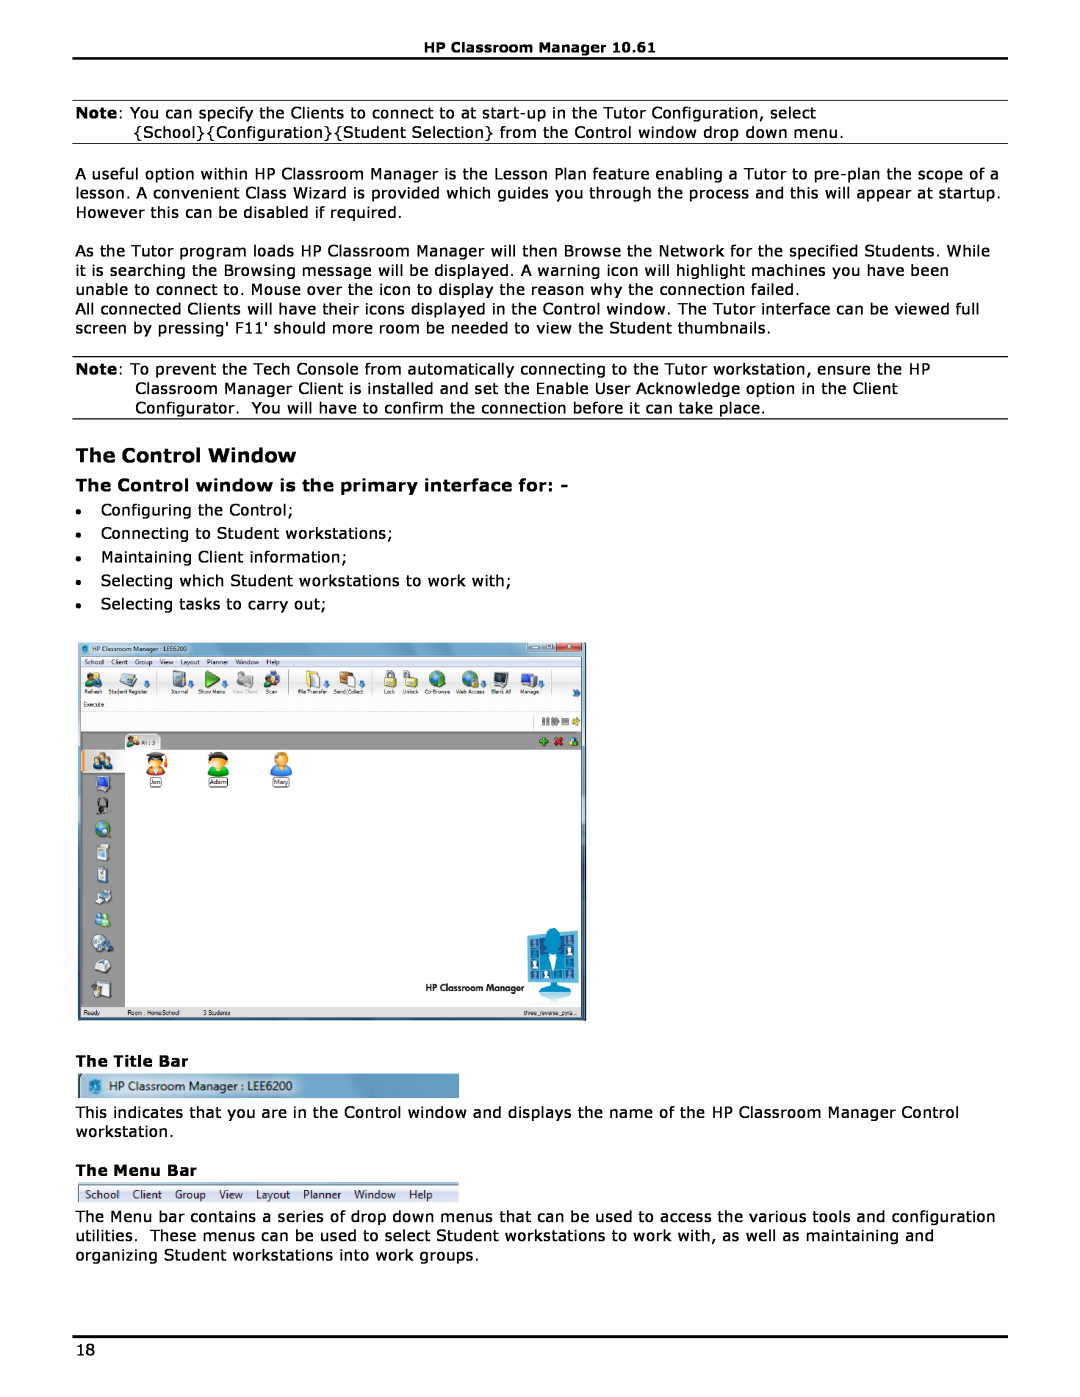 HP Classroom Manager The Control Window, The Control window is the primary interface for, The Title Bar, The Menu Bar 